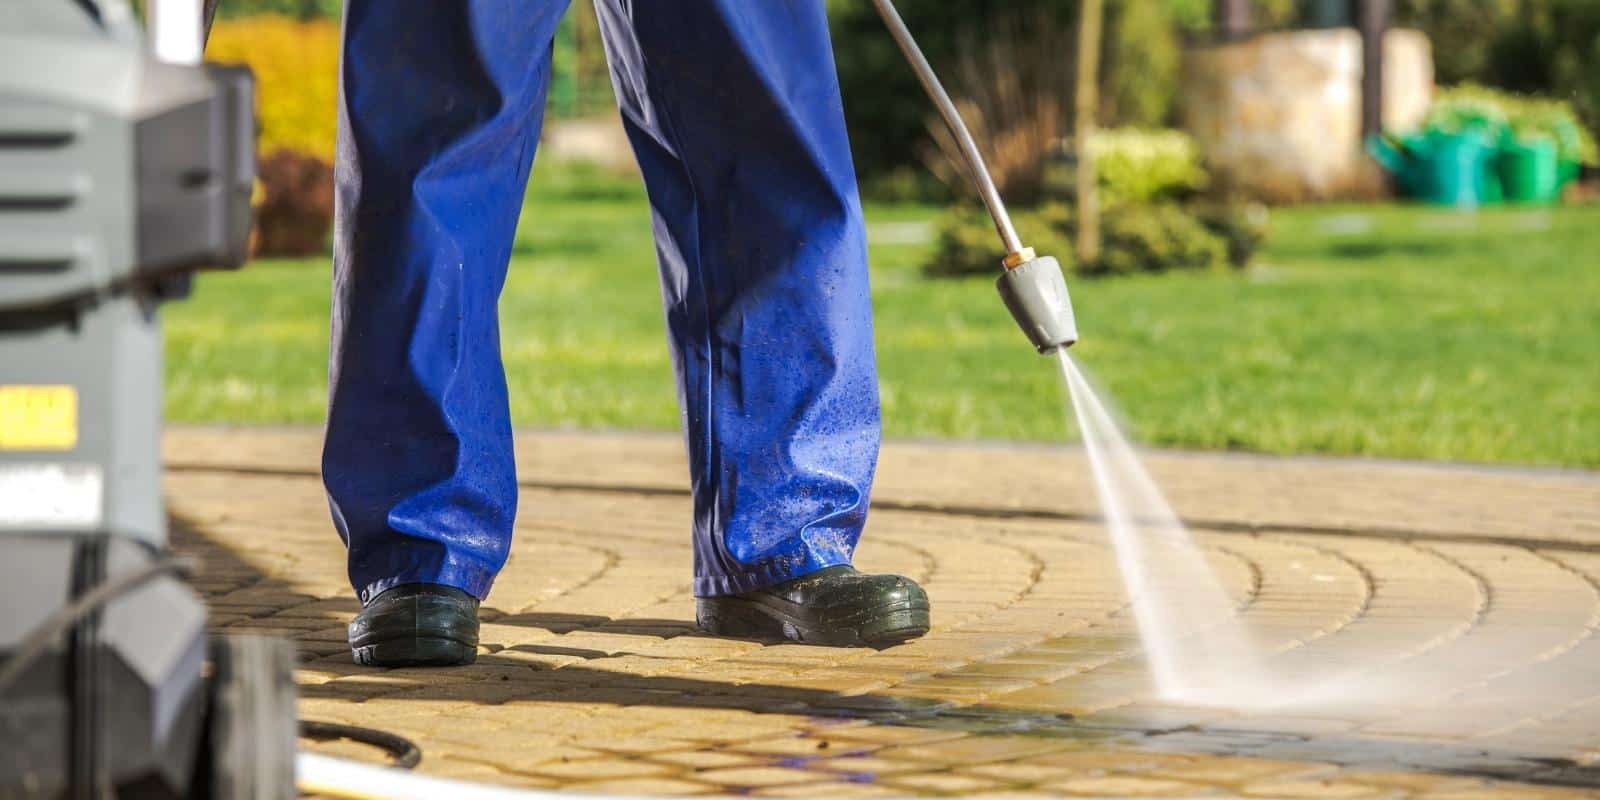 Best pressure washer for concrete 1